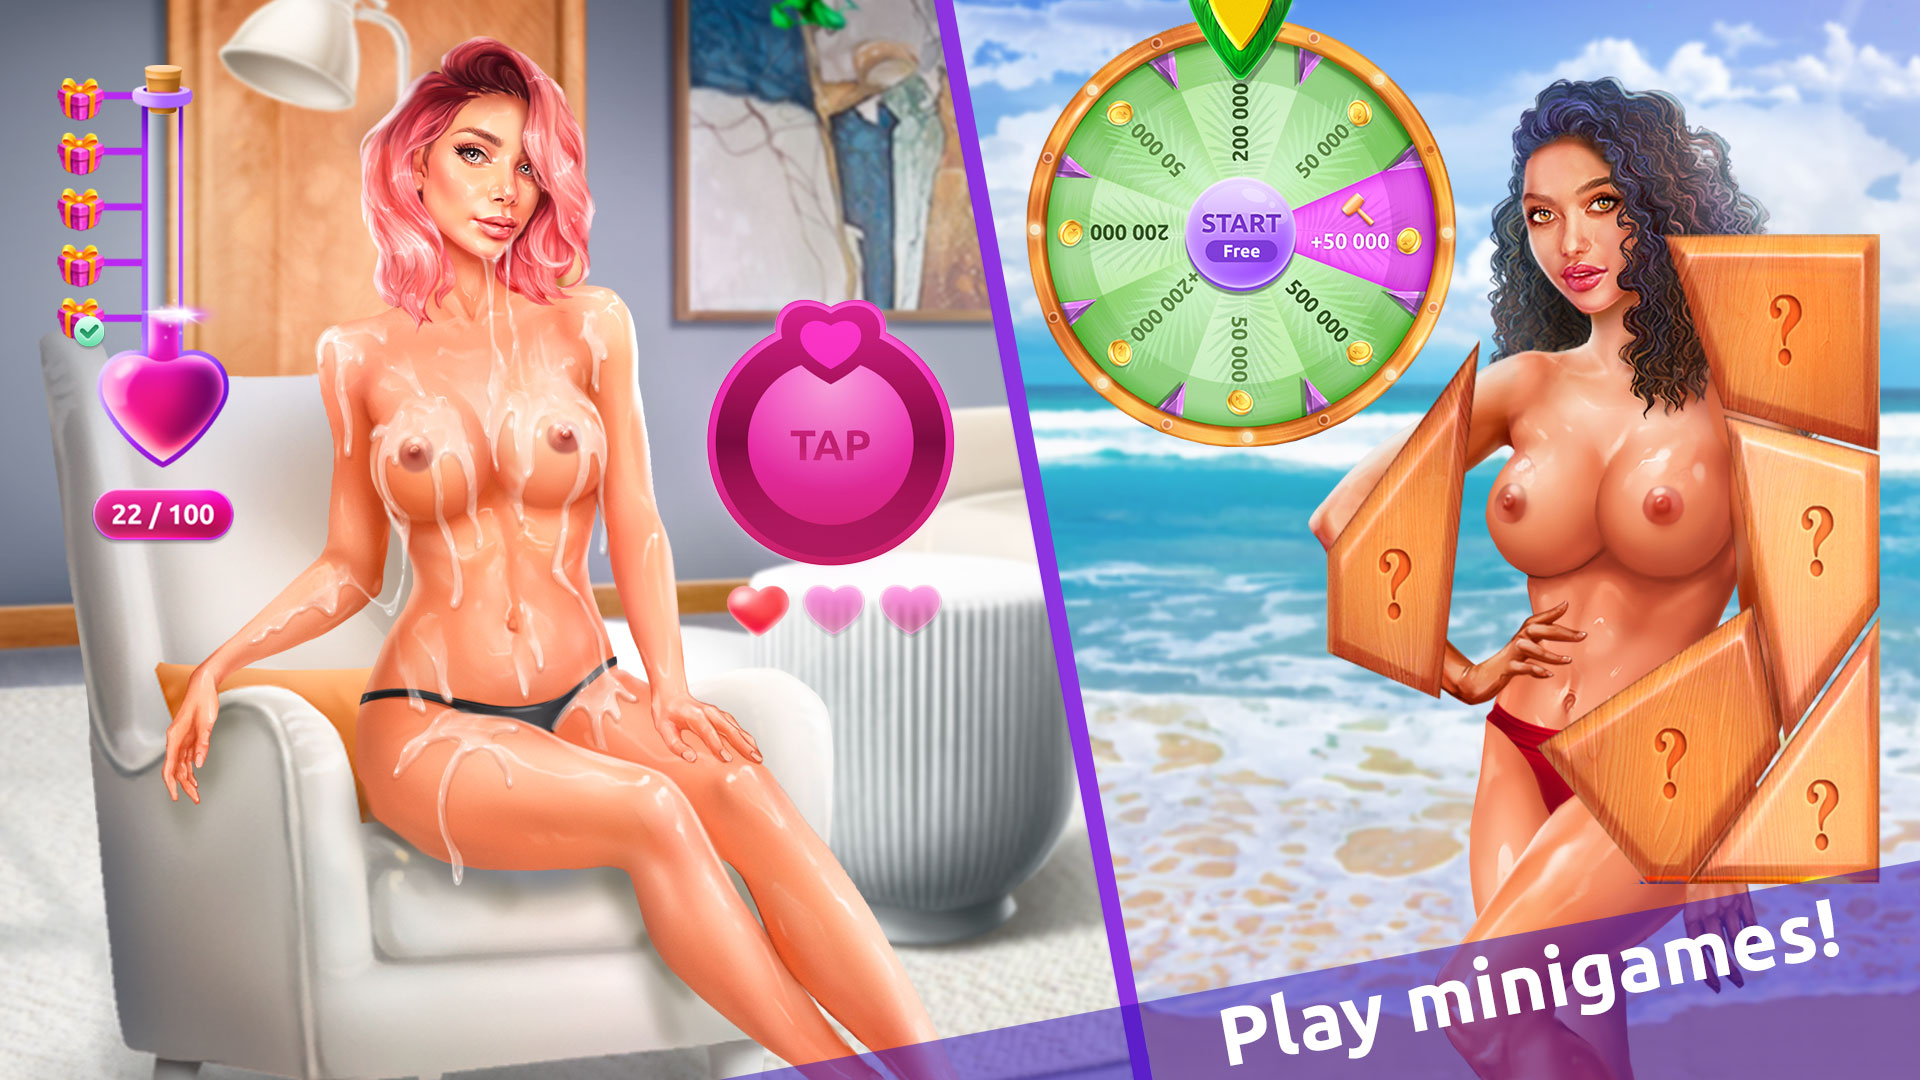 Hd Fuck 500 Mb Free - Girls and City: Spin the Bottle - Dating Sim Sex Game with APK file | Nutaku